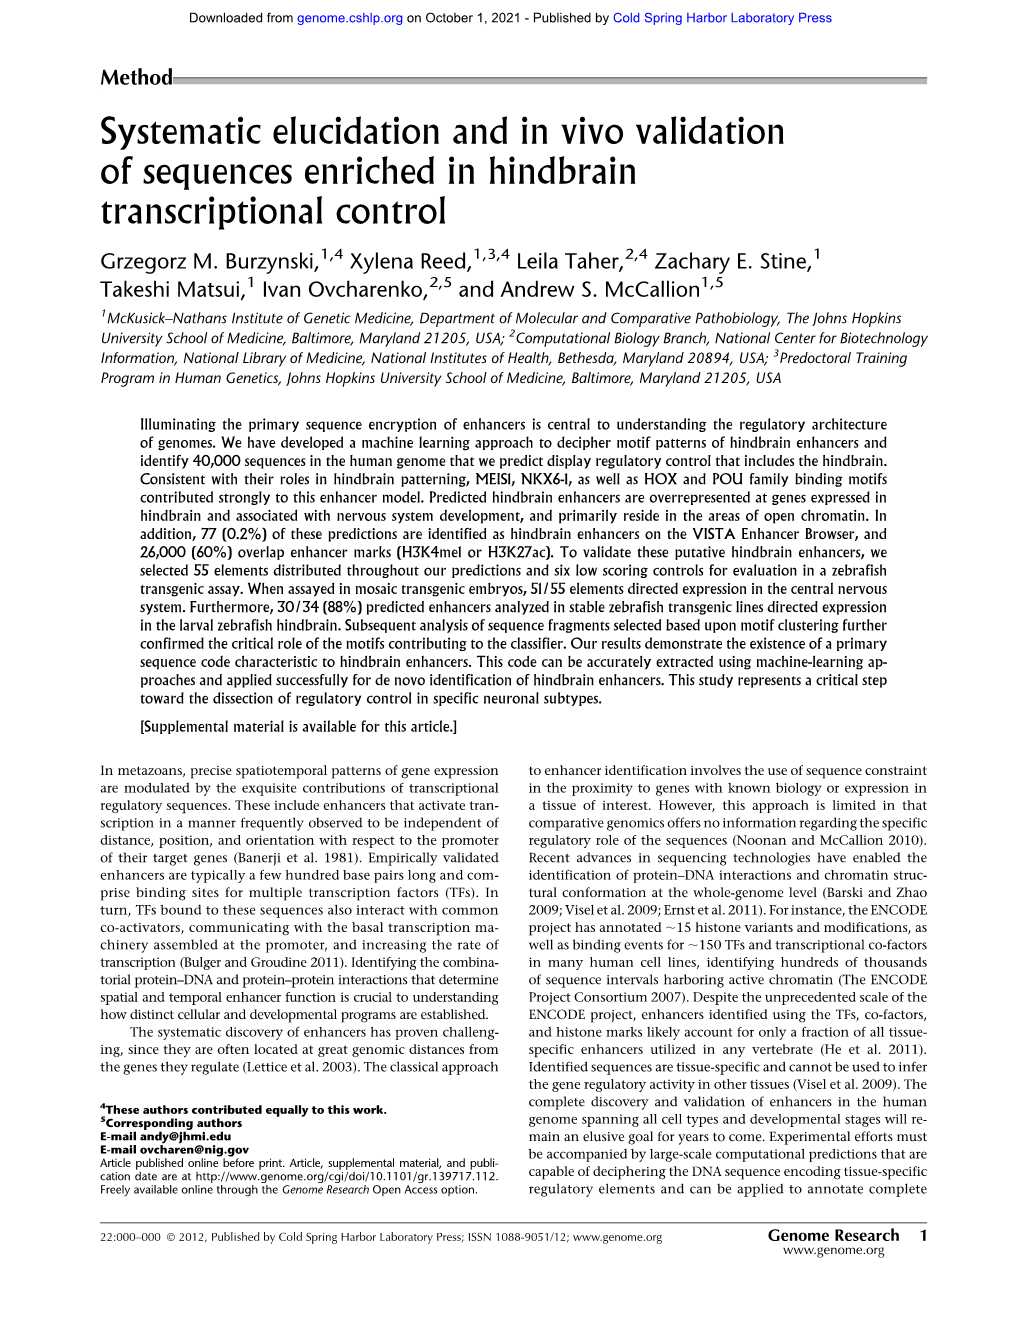 Systematic Elucidation and in Vivo Validation of Sequences Enriched in Hindbrain Transcriptional Control